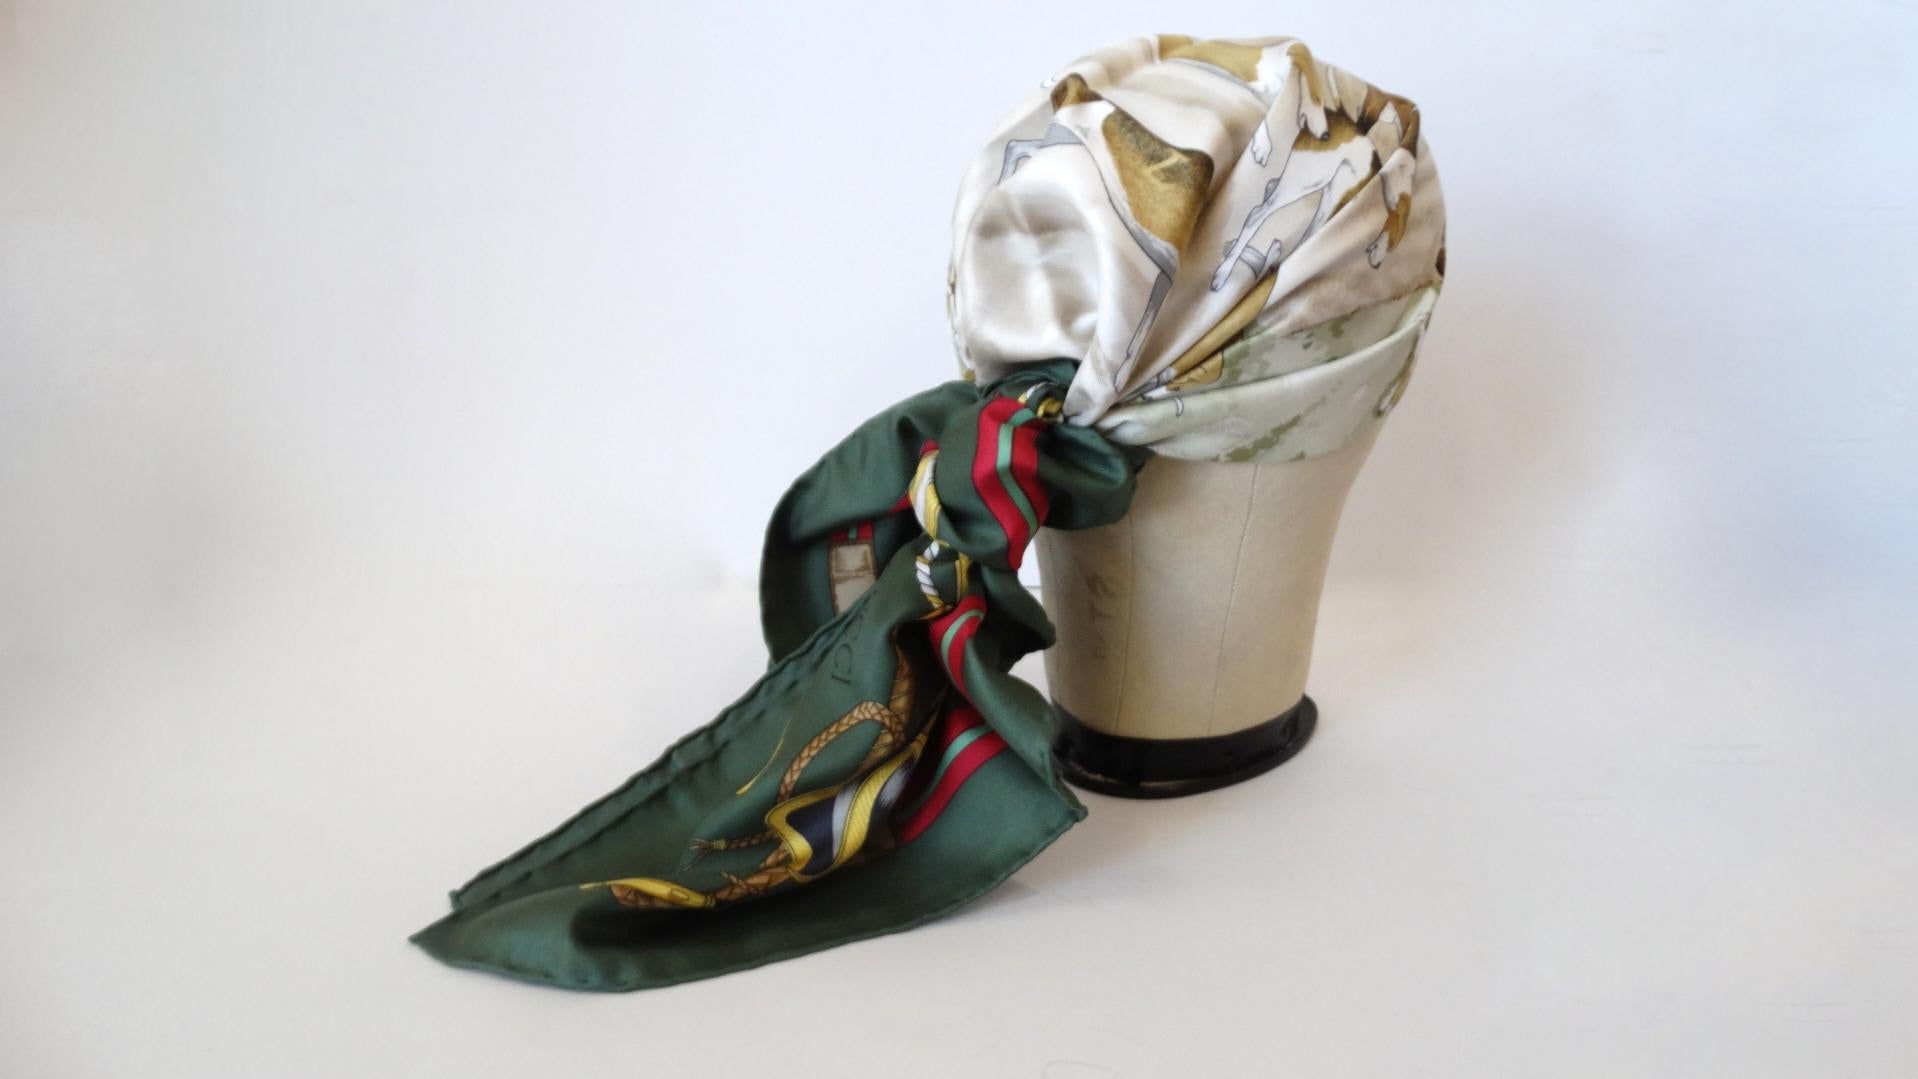 Amazing 1980s Equestrian themed silk scarf from none other than Gucci! Solid white background, decorated by horses and hunting hounds. Bordered by Gucci’s signature contrasting green and red colors. The size of this scarf allows for a number of ways